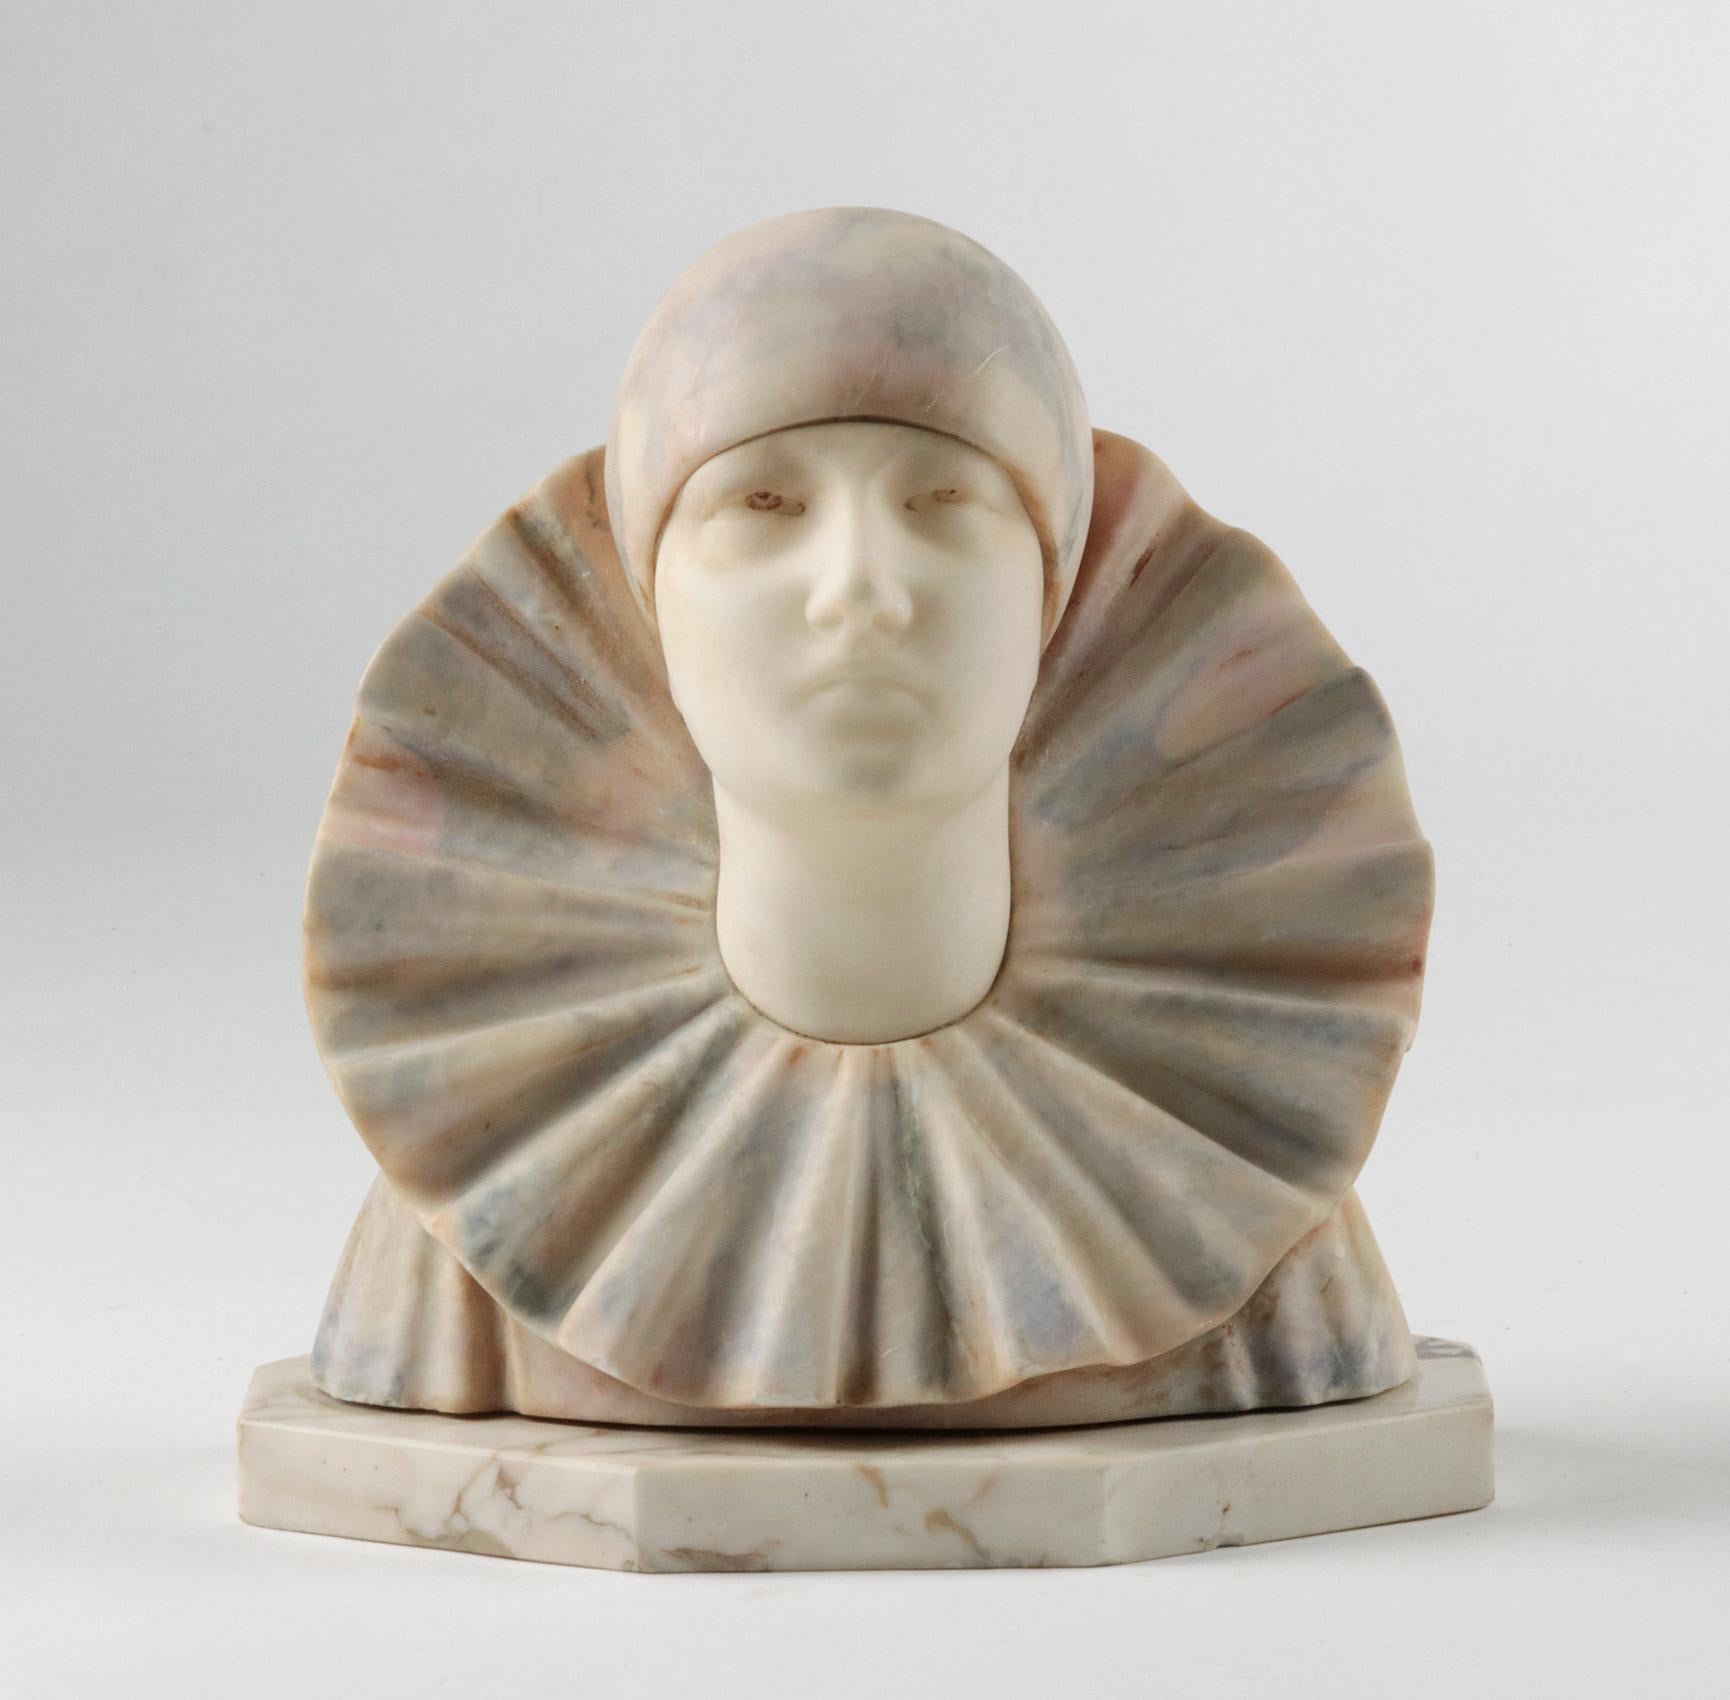 This beautiful statue was created by the Italian artist A. Gentili. It is an image of a clown or Pierrot. The face is made of beautiful white alabaster, which contrasts nicely with the colored alabaster of the clothes. The statue has a stylized,